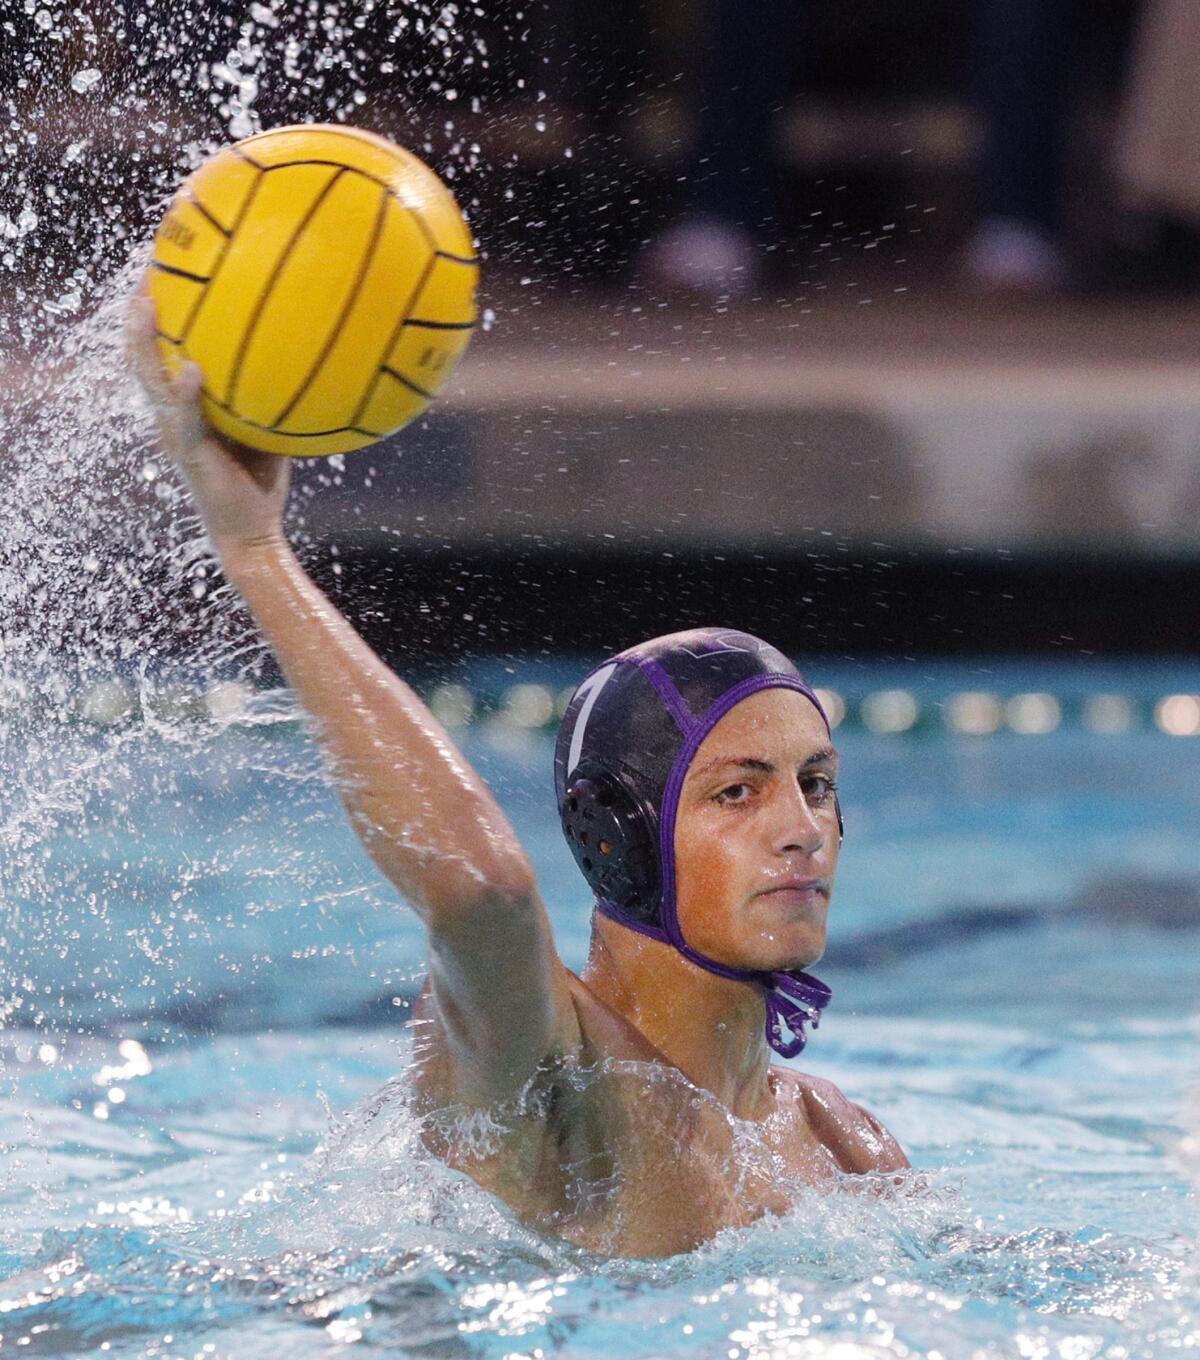 Deceptively, looking the other way, Hoover's Hakop Ansuryan shoots a rocket of a shot to score his first goal against Arcadia in the third quarter in a Pacific League boys' water polo final at Arcadia High School on Thursday, October 31, 2019. Hoover won the Pacific League title beating Arcadia 10-6.